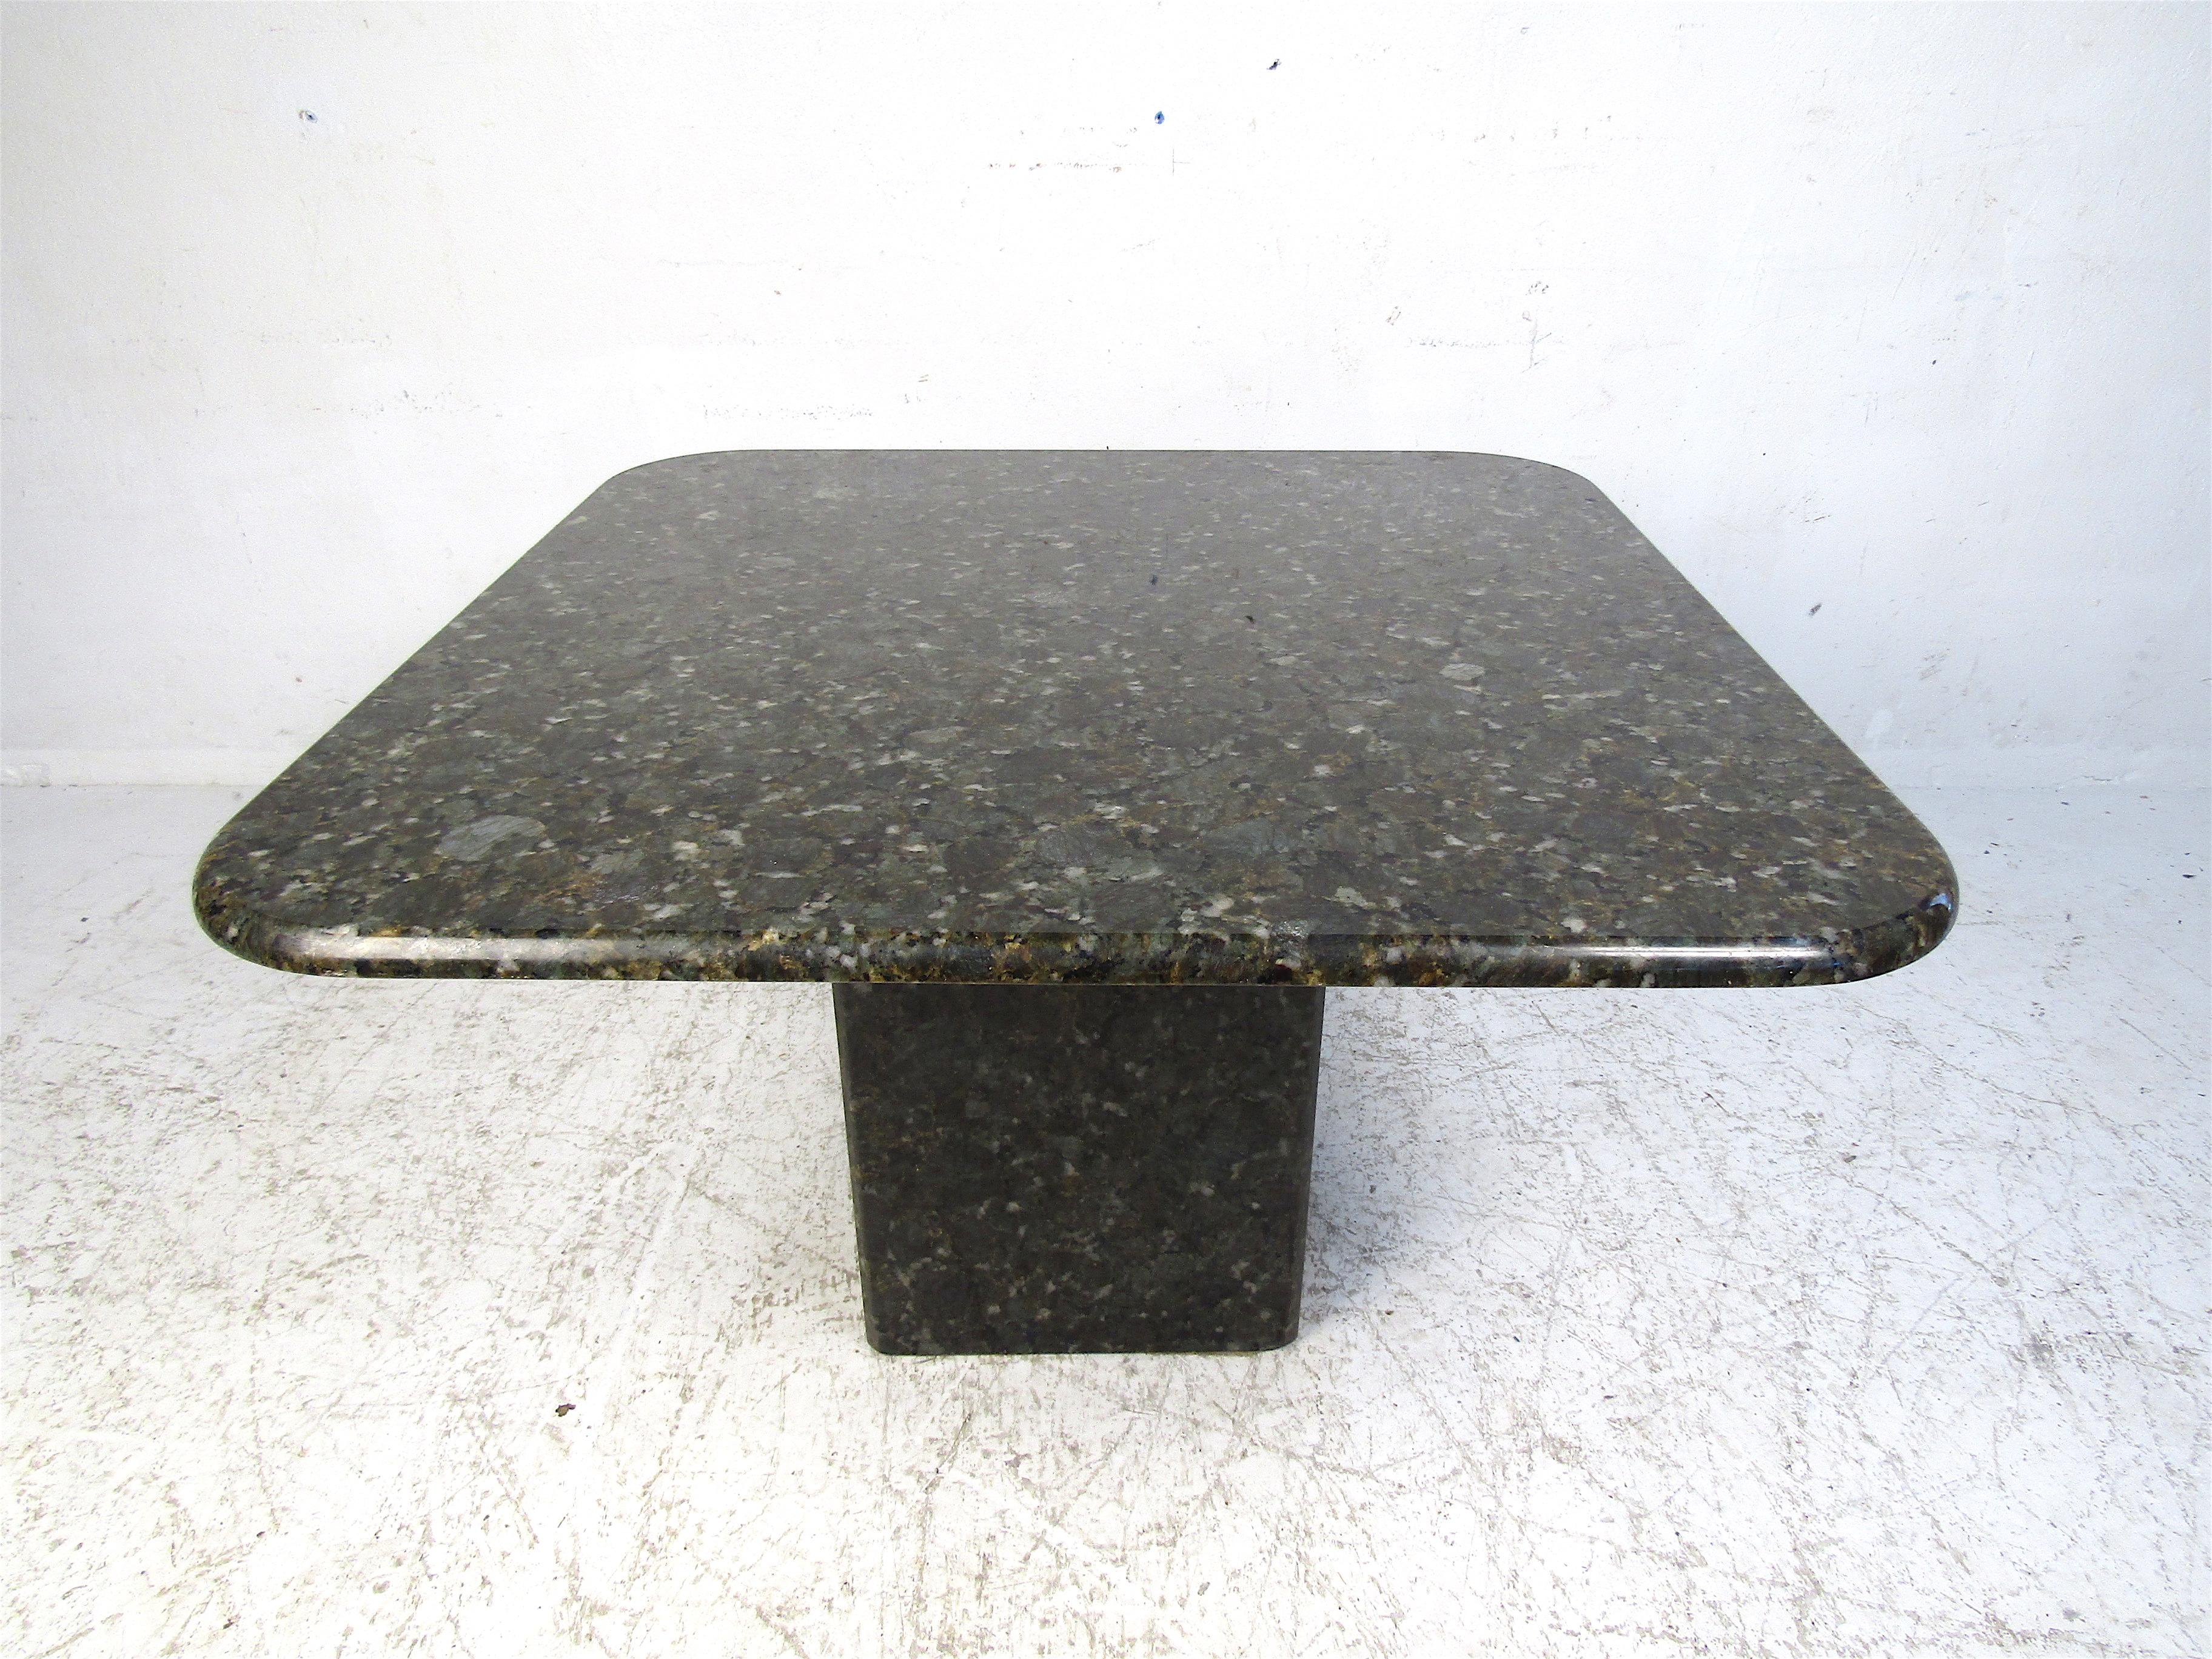 This compact yet bold table will help create an oasis in any outdoor space. Made from solid granite with a super polished finish this piece will hold up for years to come while adding a true level of sophistication to your outdoor entertainment